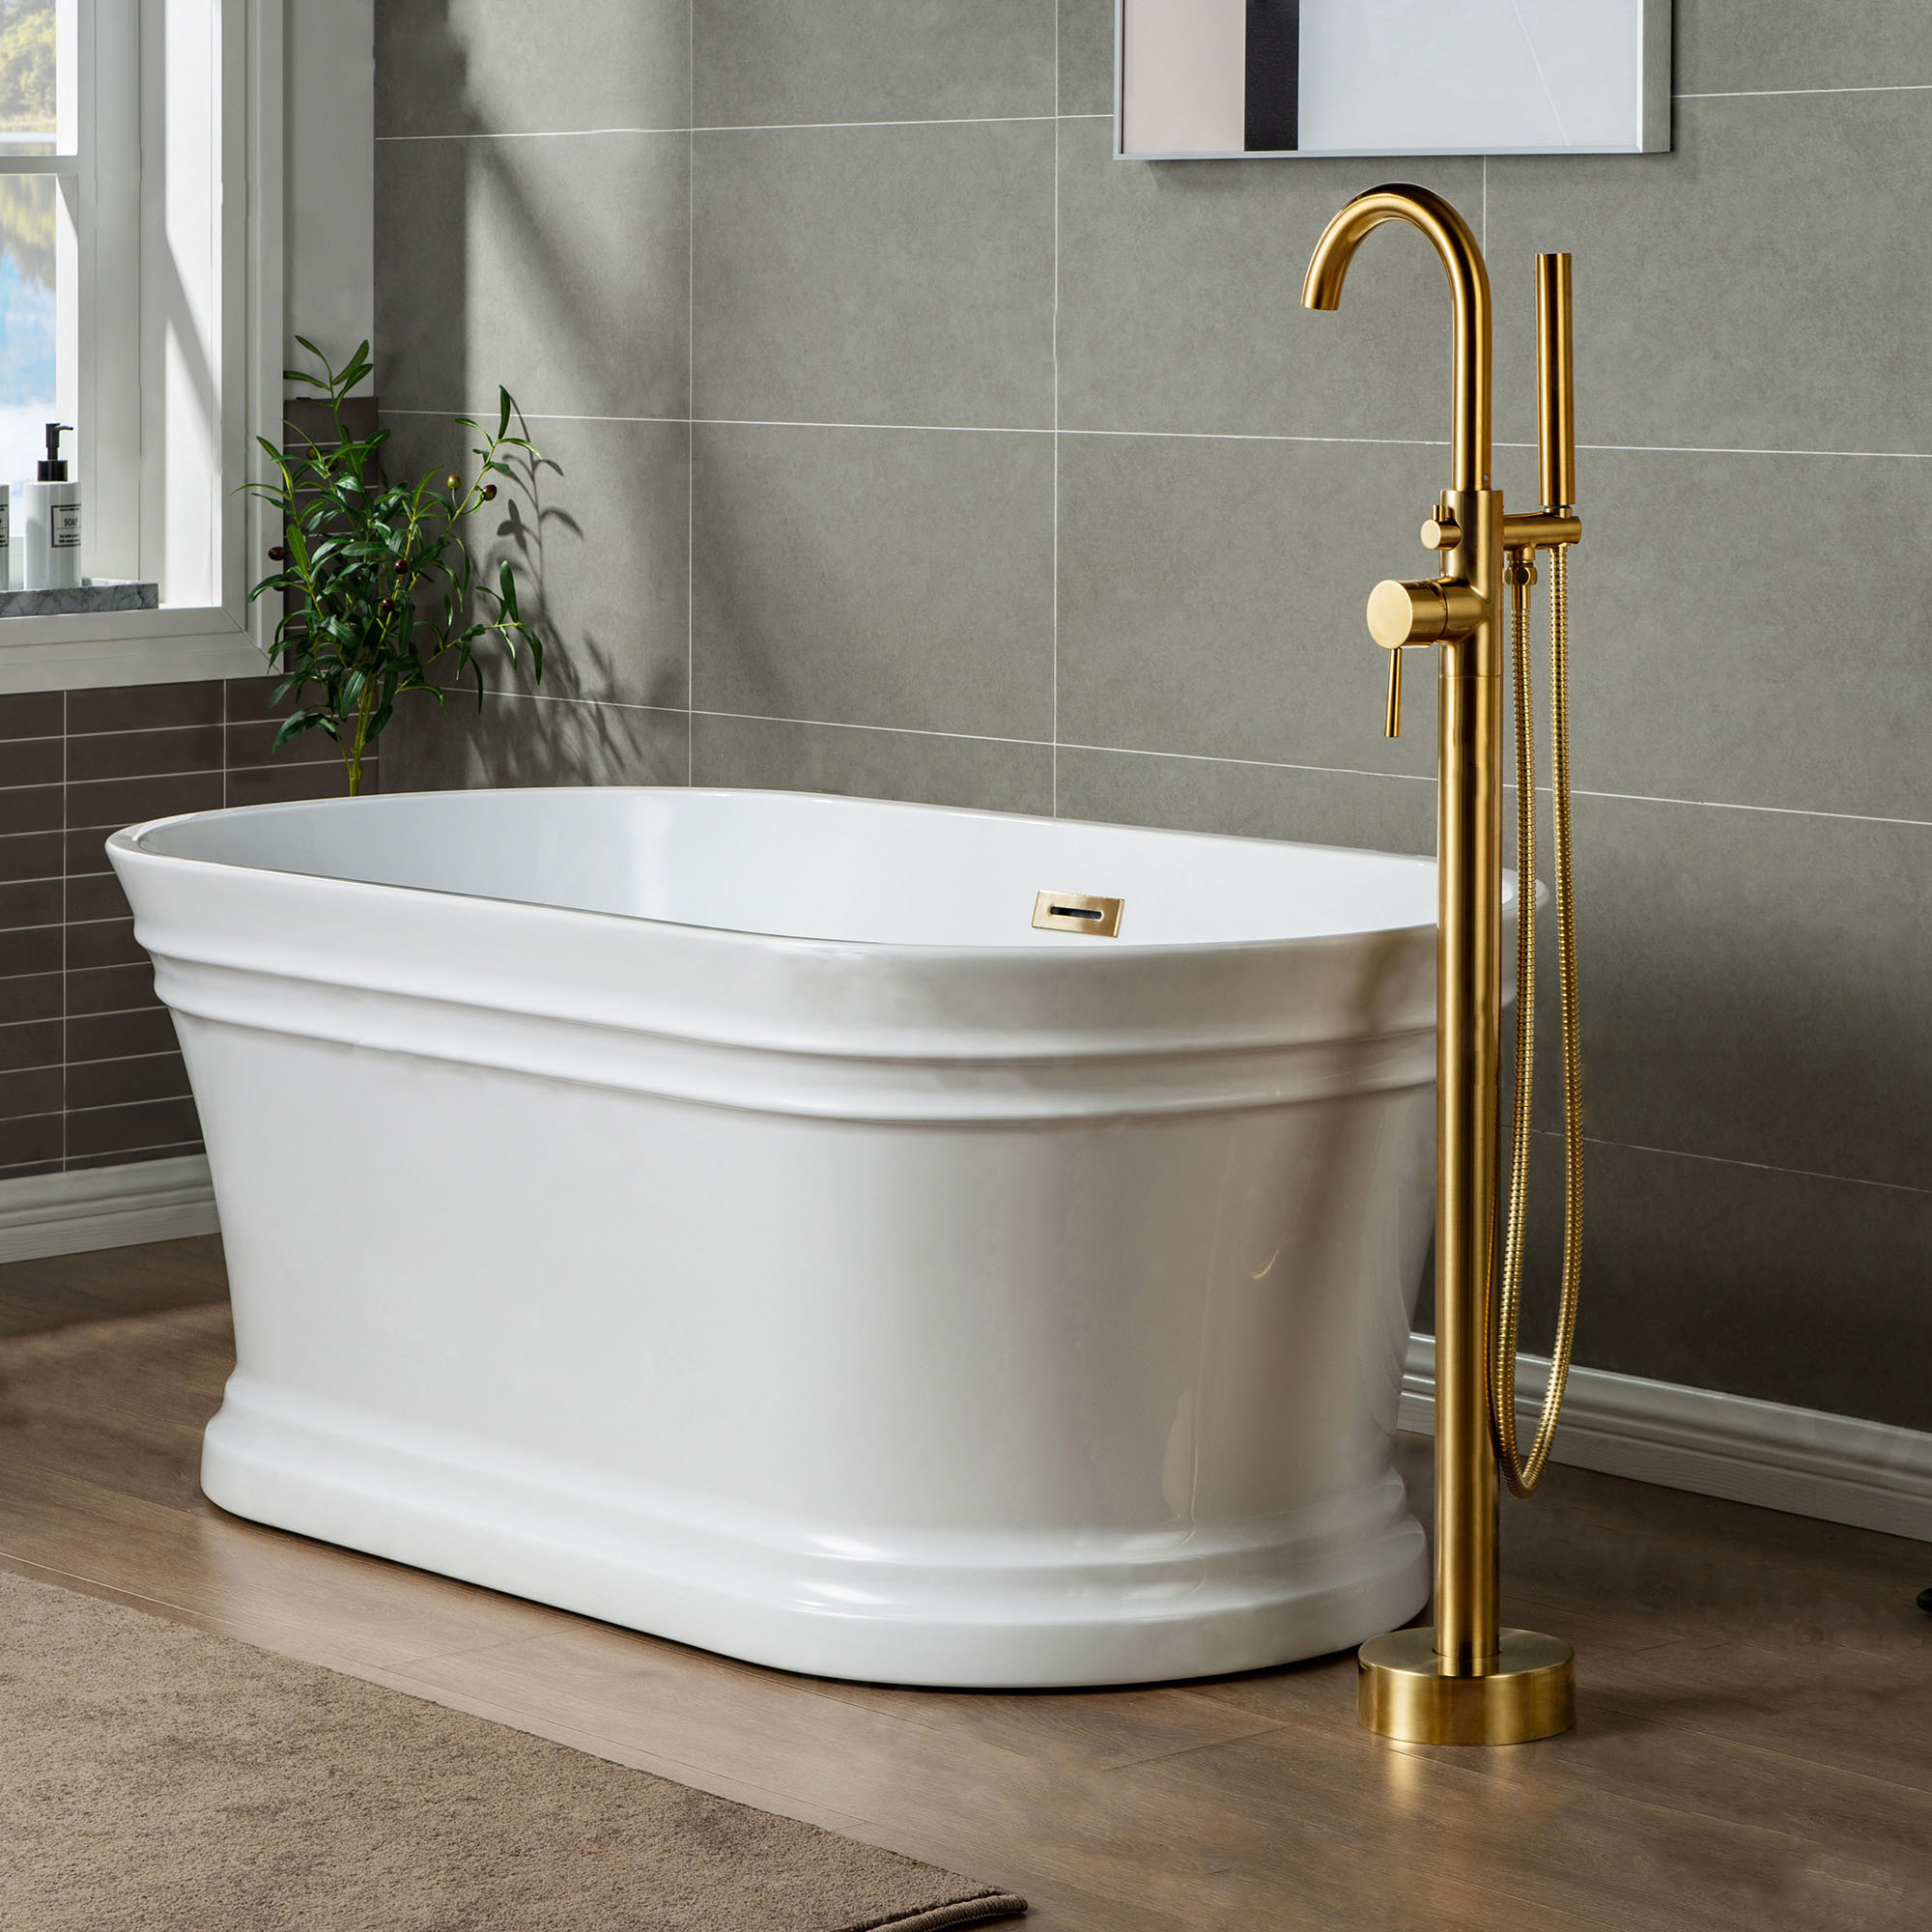  WOODBRIDGE F0007BGDR Contemporary Single Handle Floor Mount Freestanding Tub Filler Faucet with Hand shower in Brushed Gold Finish._14259